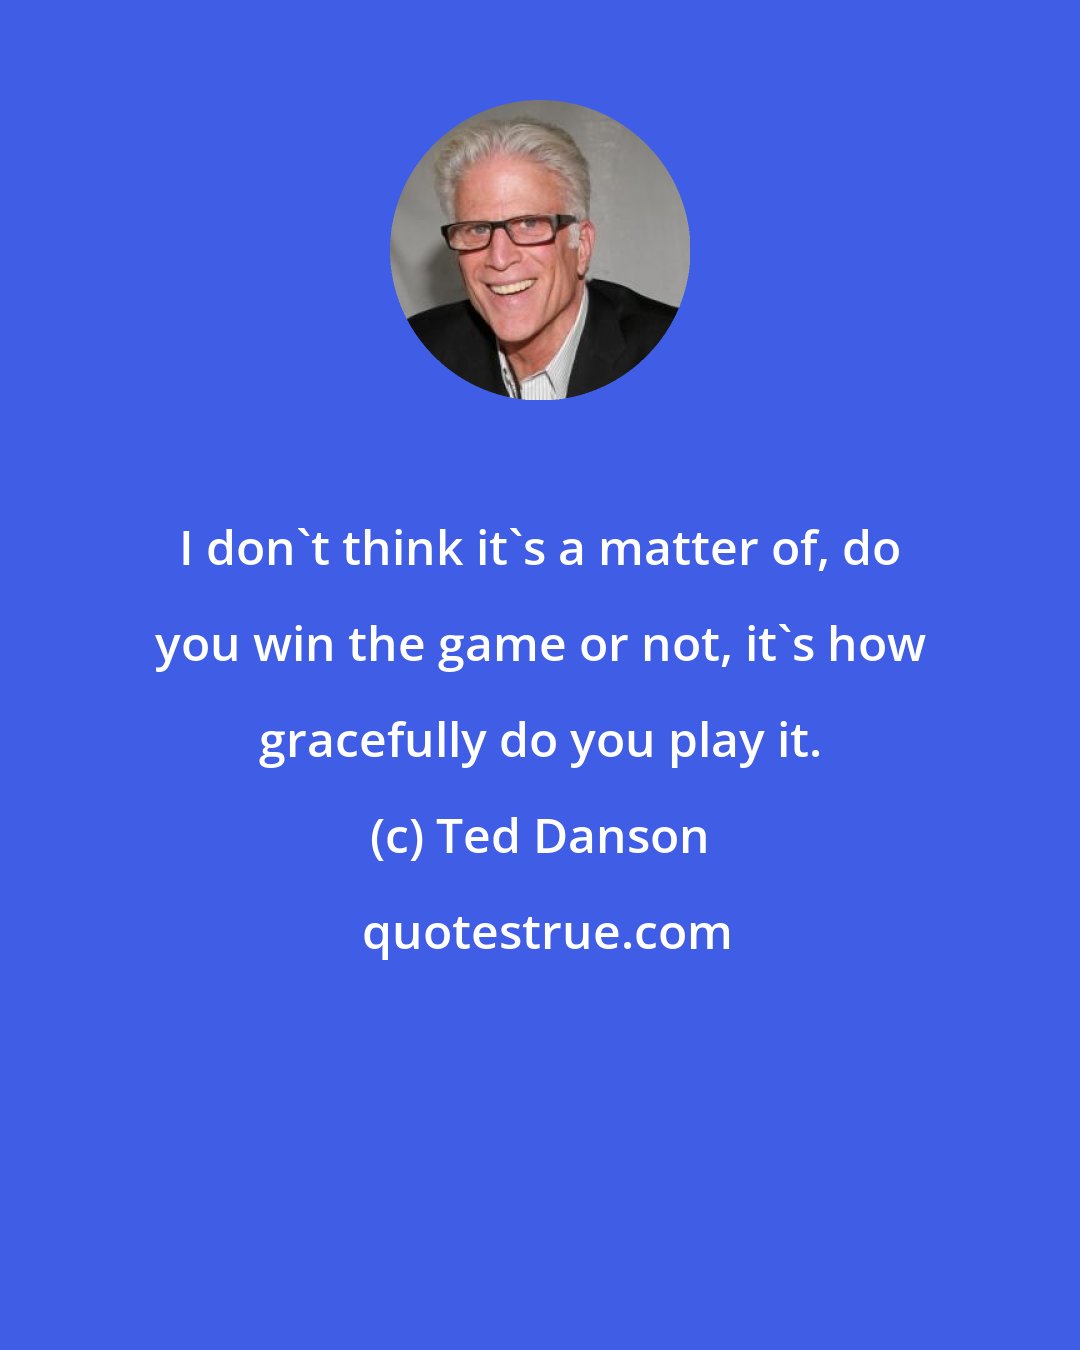 Ted Danson: I don't think it's a matter of, do you win the game or not, it's how gracefully do you play it.